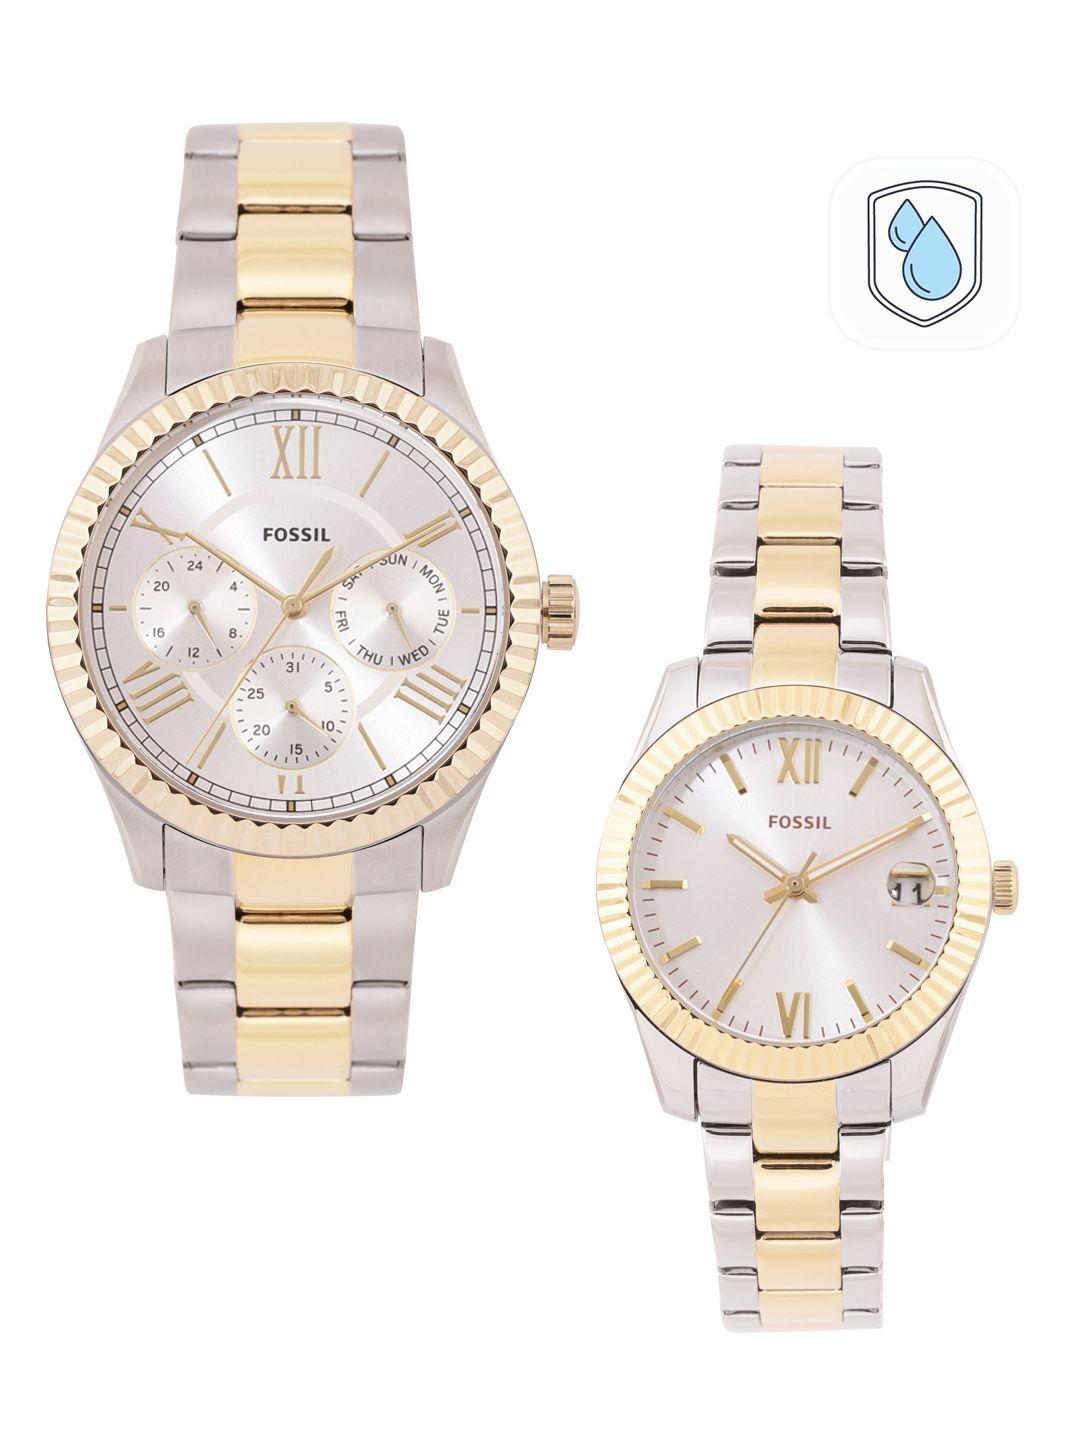 fossil unisex chapman his & her analogue watch fs5987set